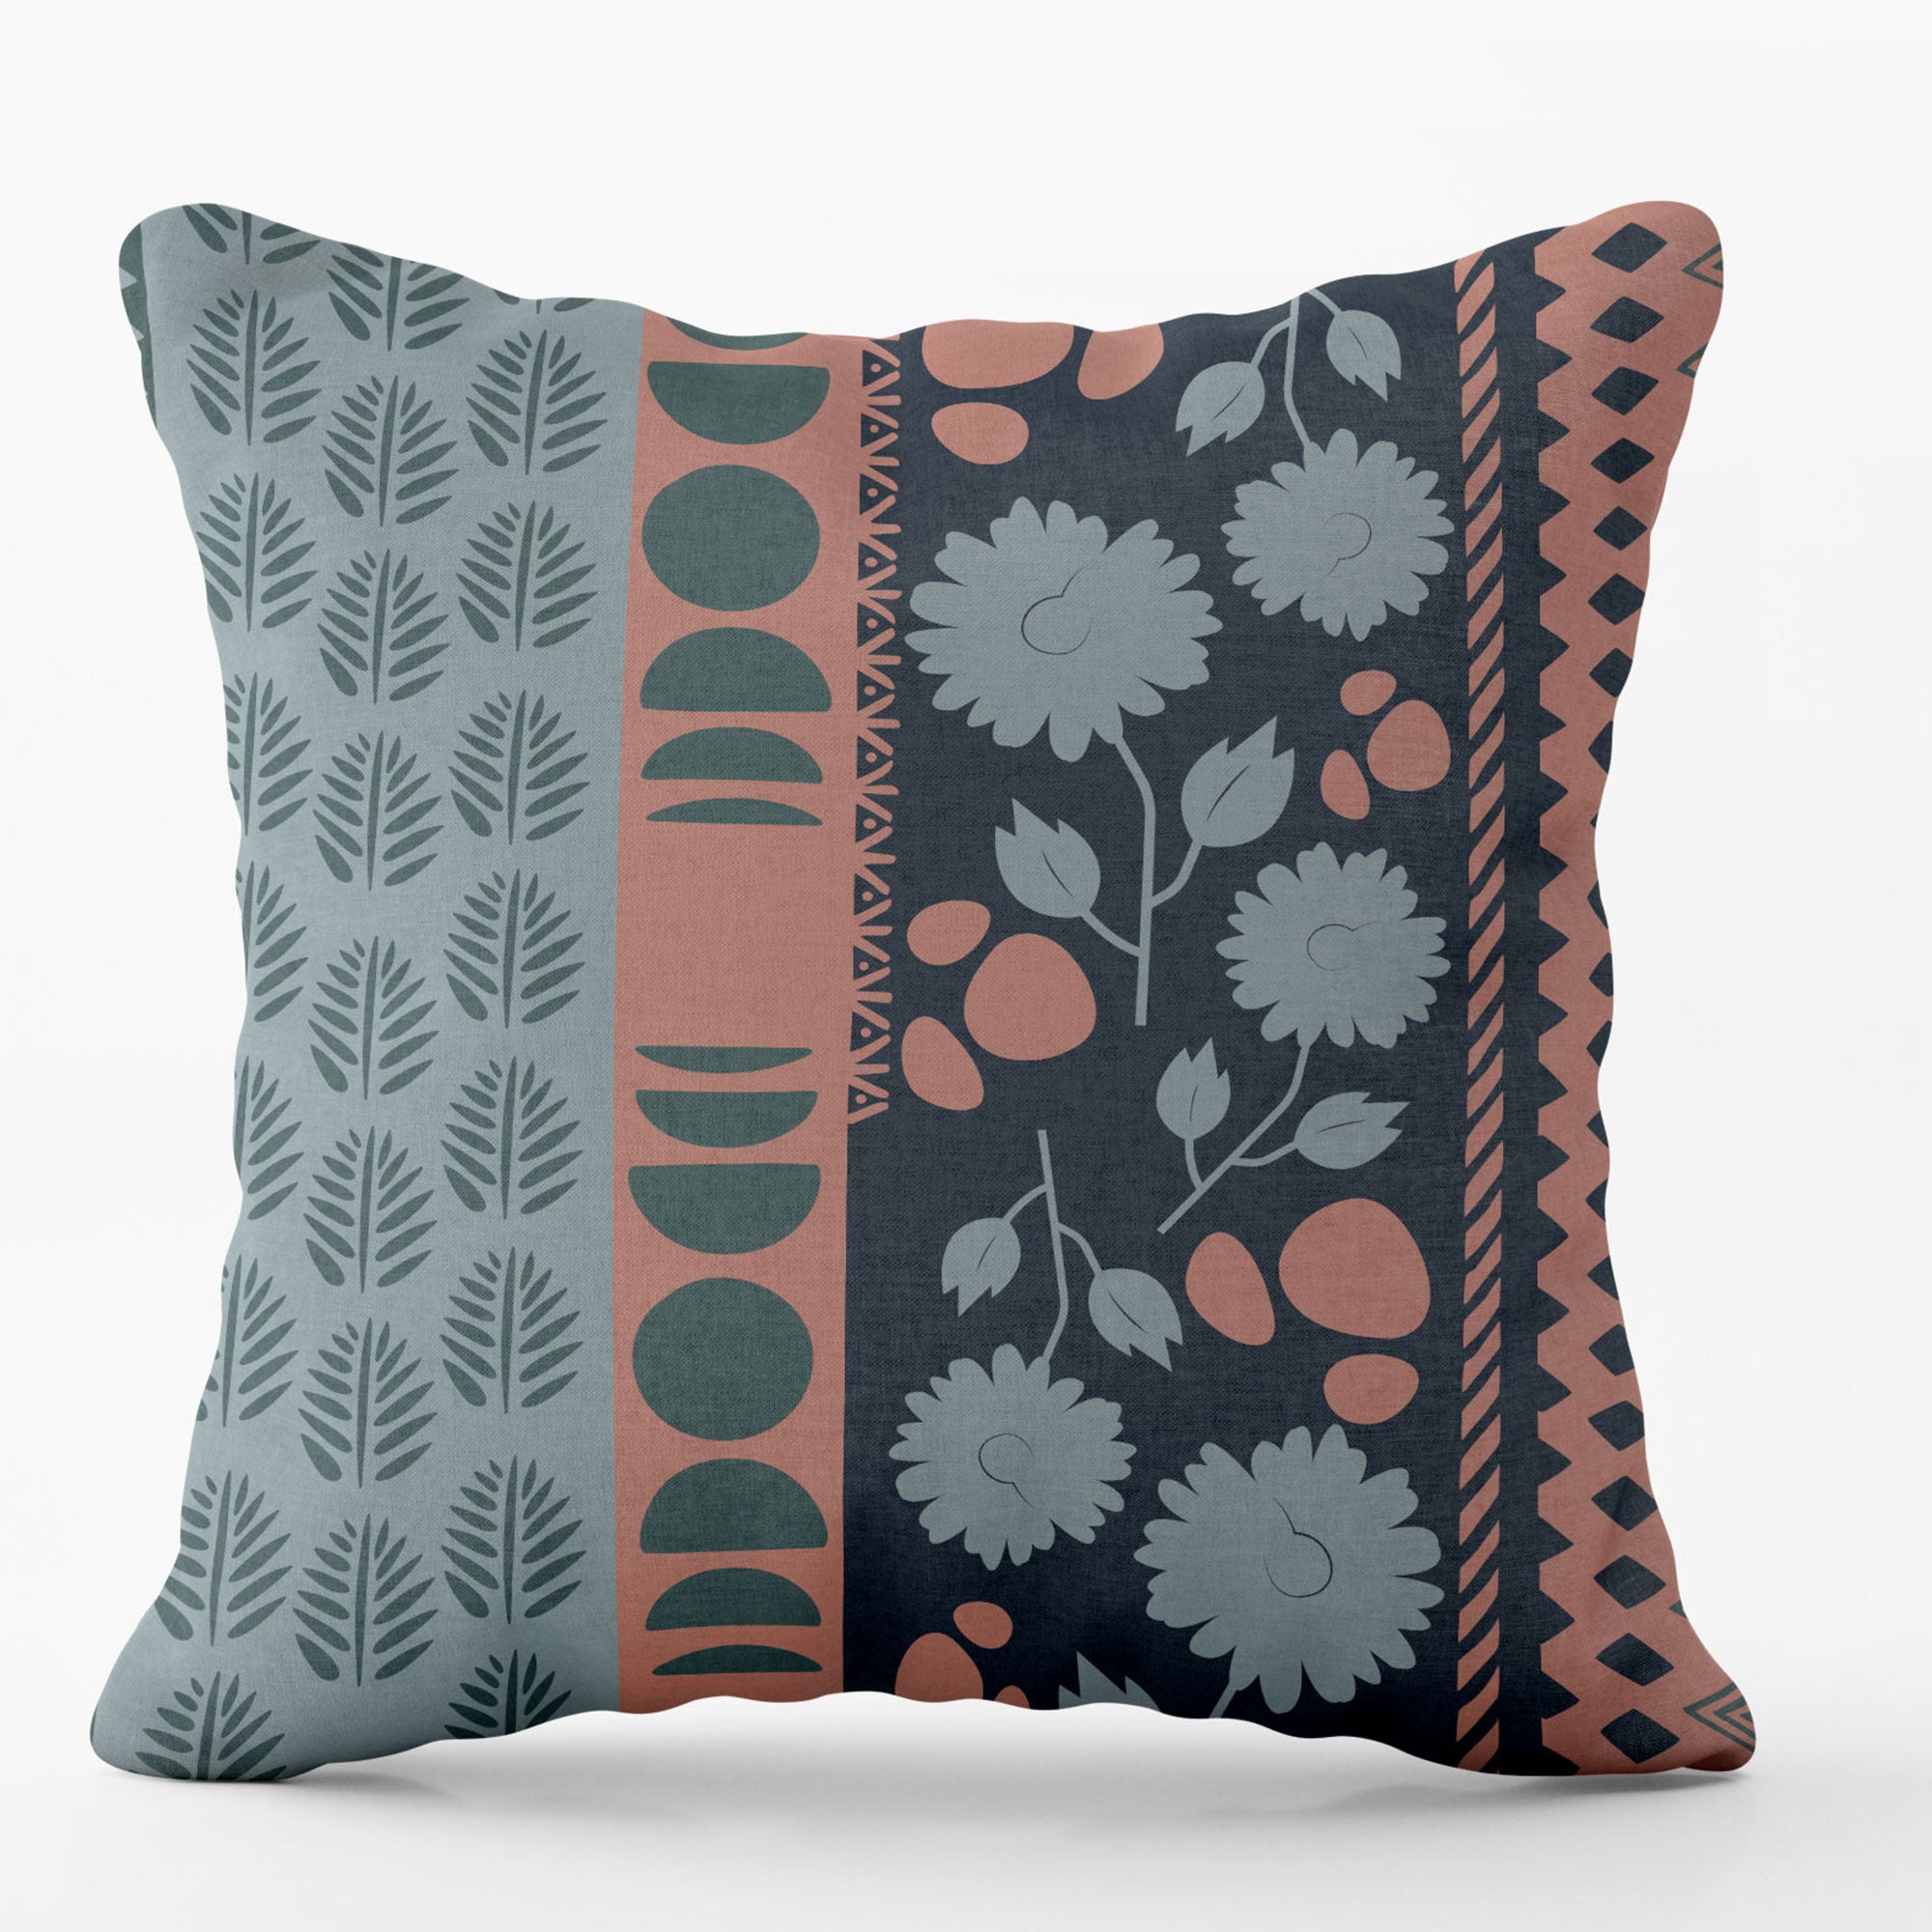 Midnight Glory Printed Pillow Cover